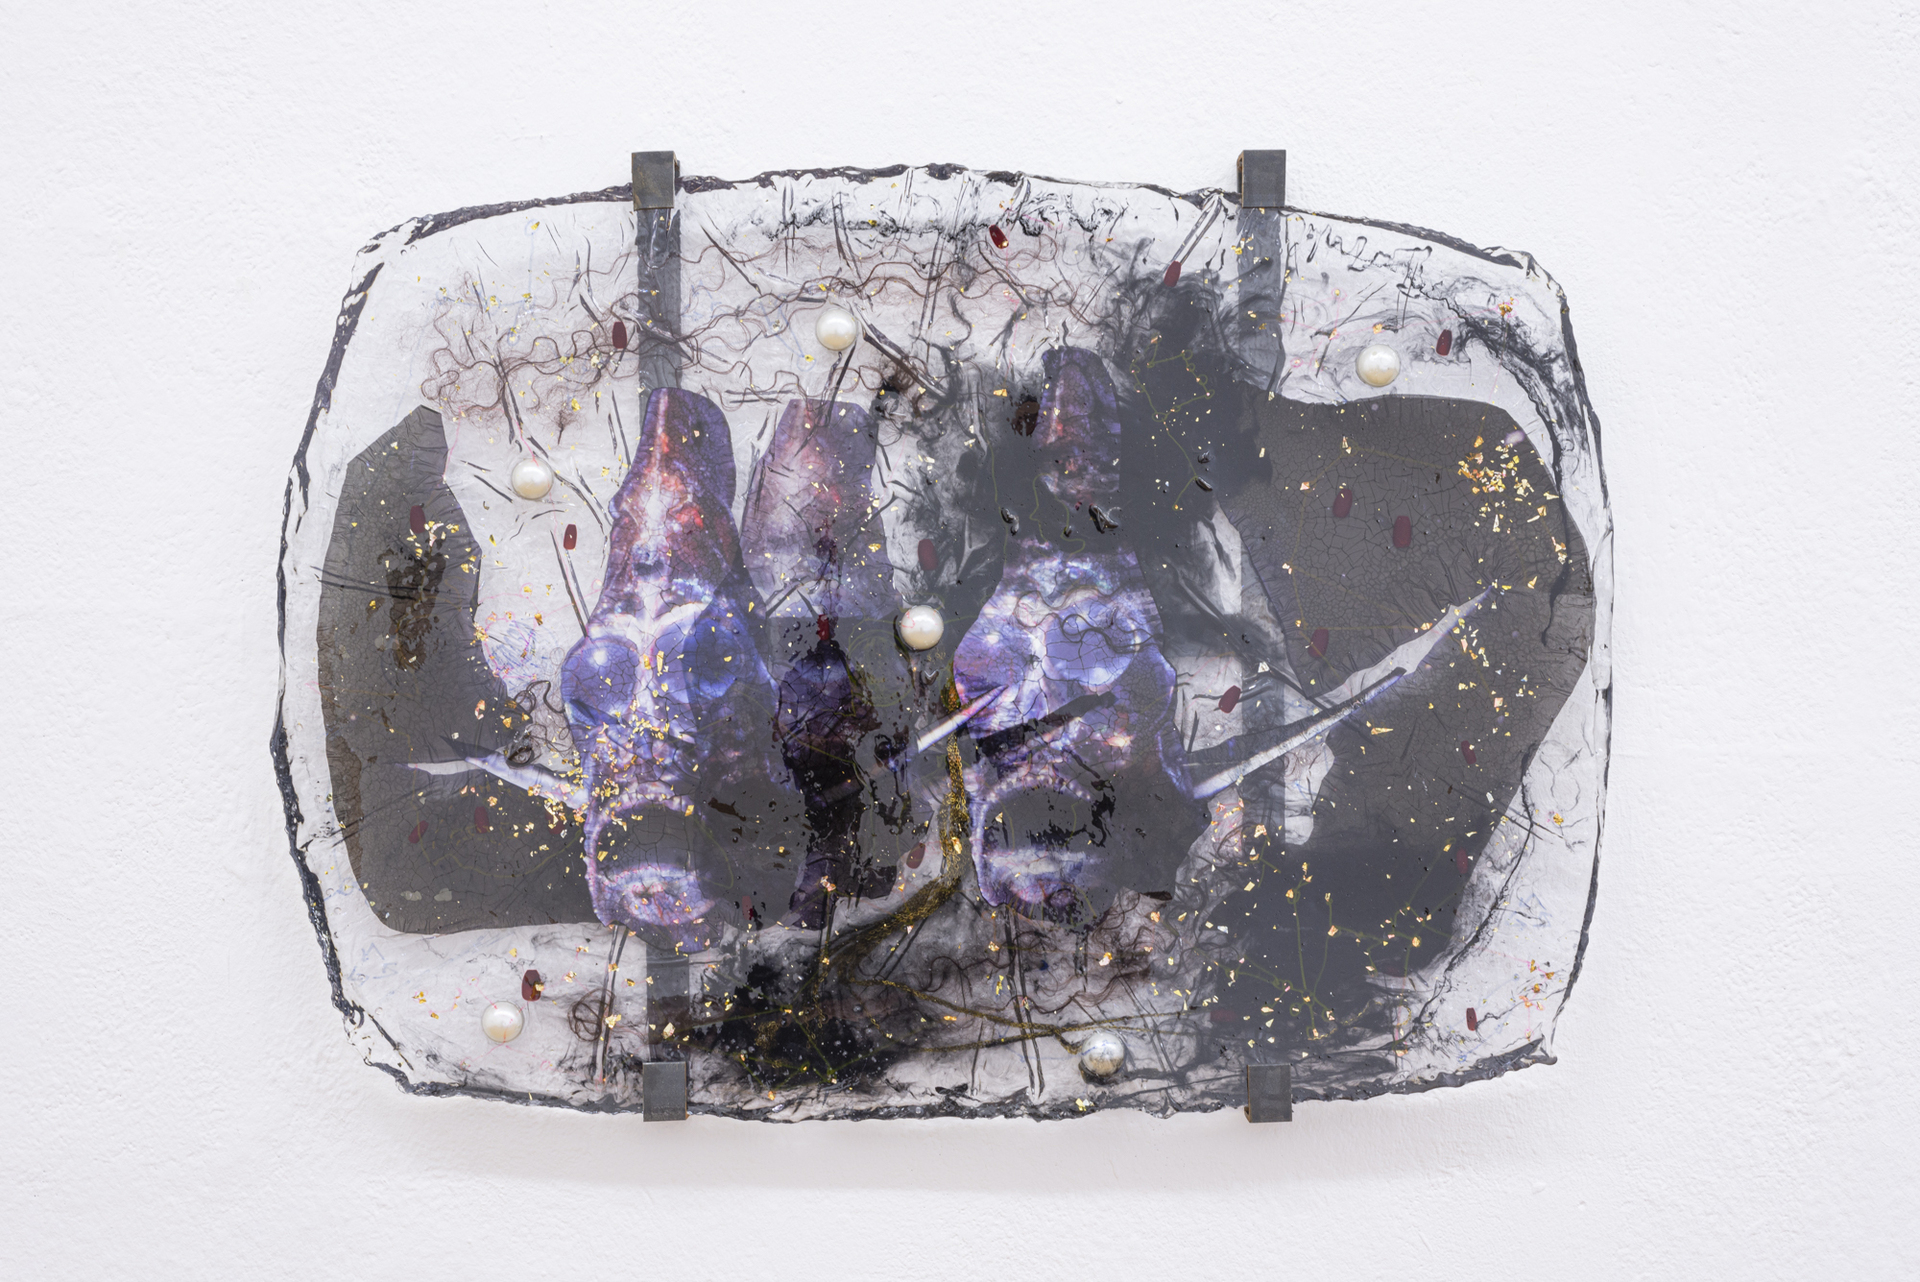 Theresa Weber, Cosmic Momento Black, 2021, collage in polyester resin, 68 x 90 cm